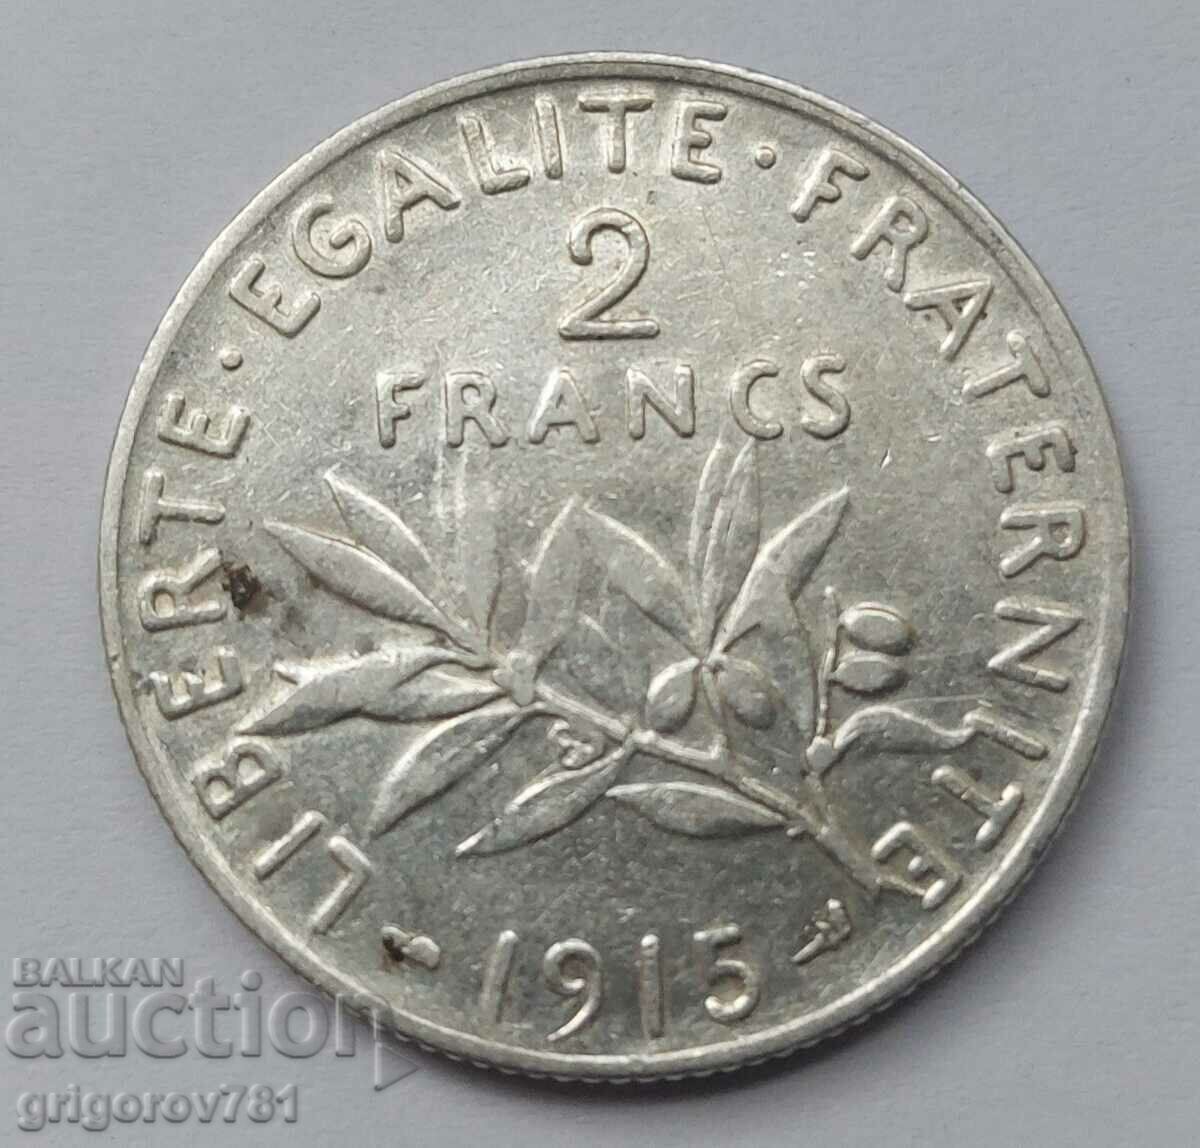 2 Francs Silver France 1915 - Silver Coin #55